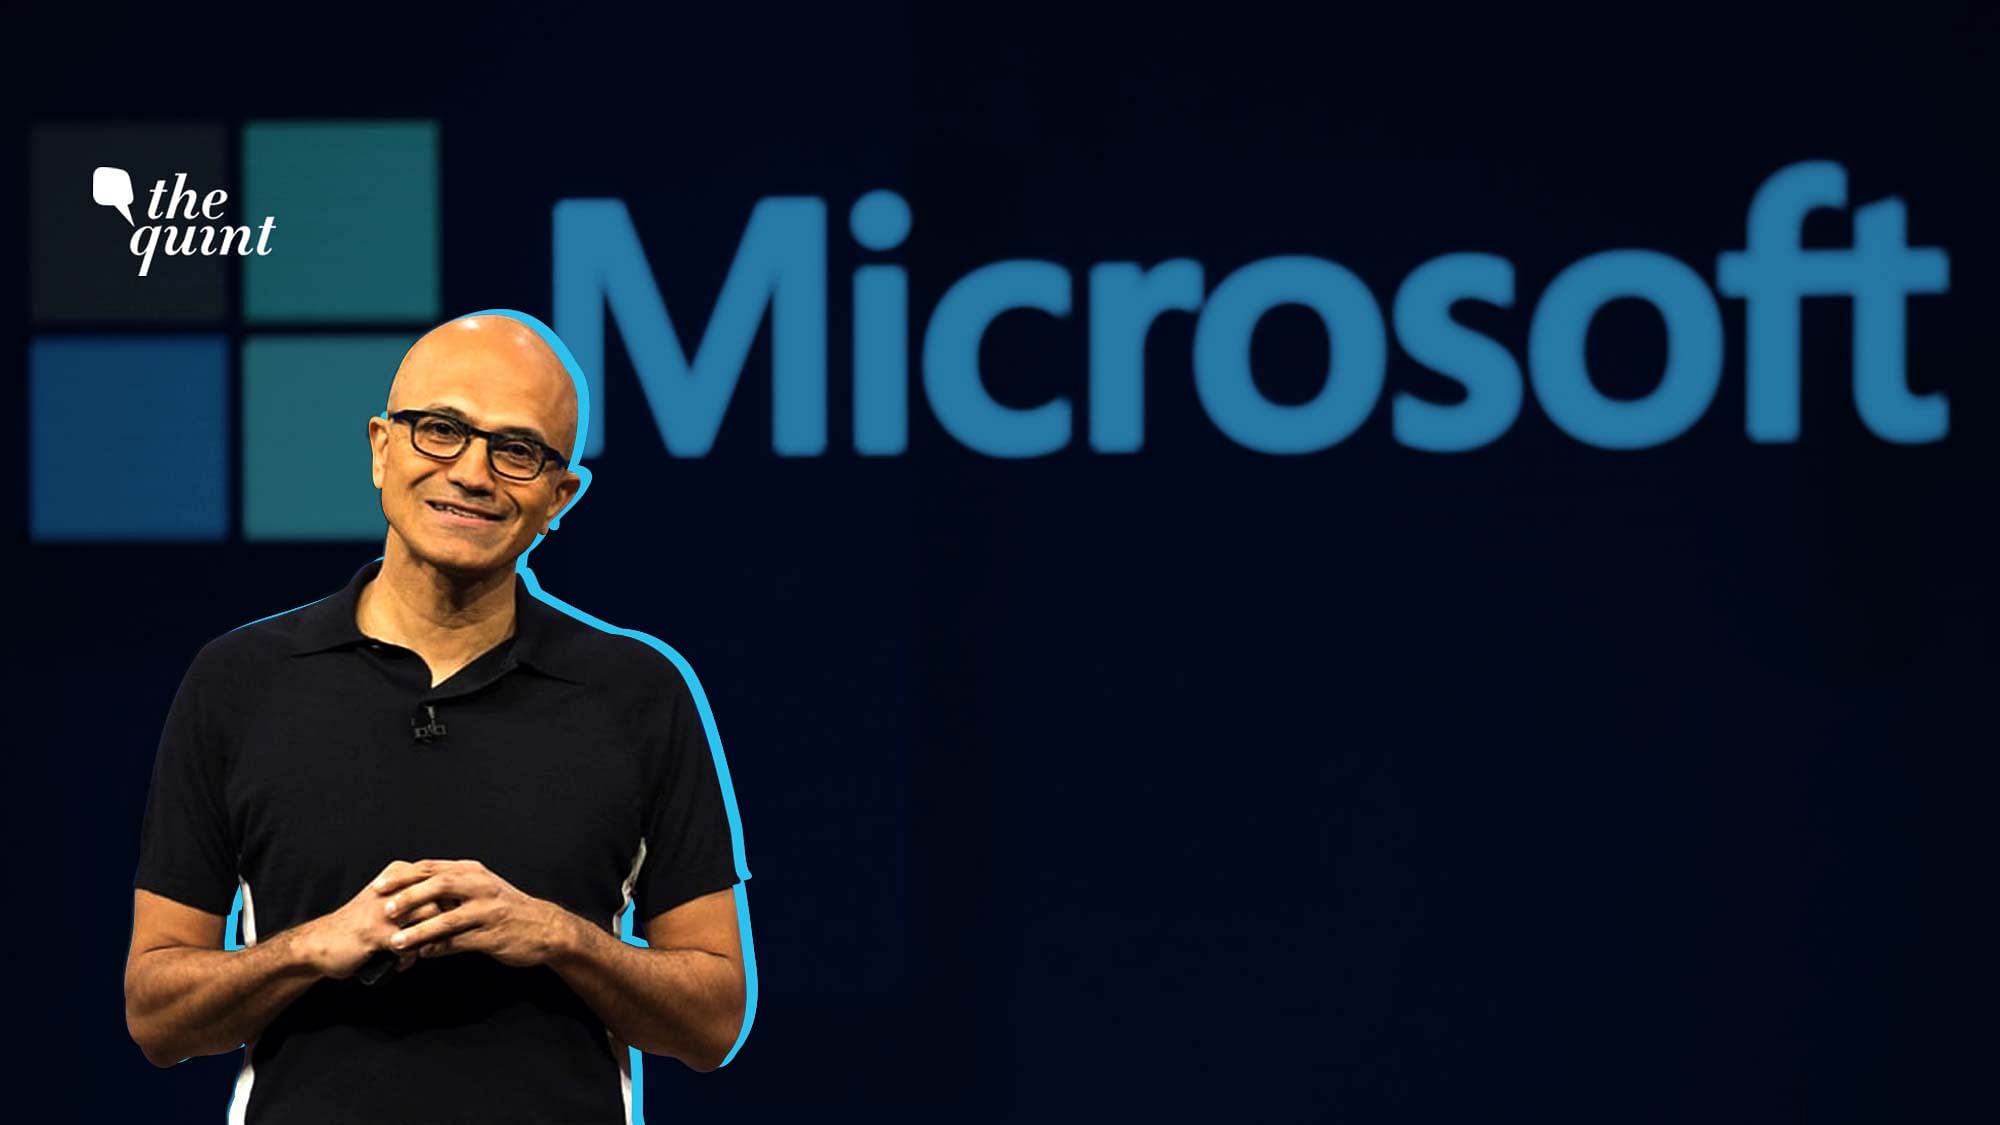 Microsoft has elected CEO Satya Nadella as Chairman of the tech giant, a first in two decades when Microsoft’s chairman will also be its CEO.